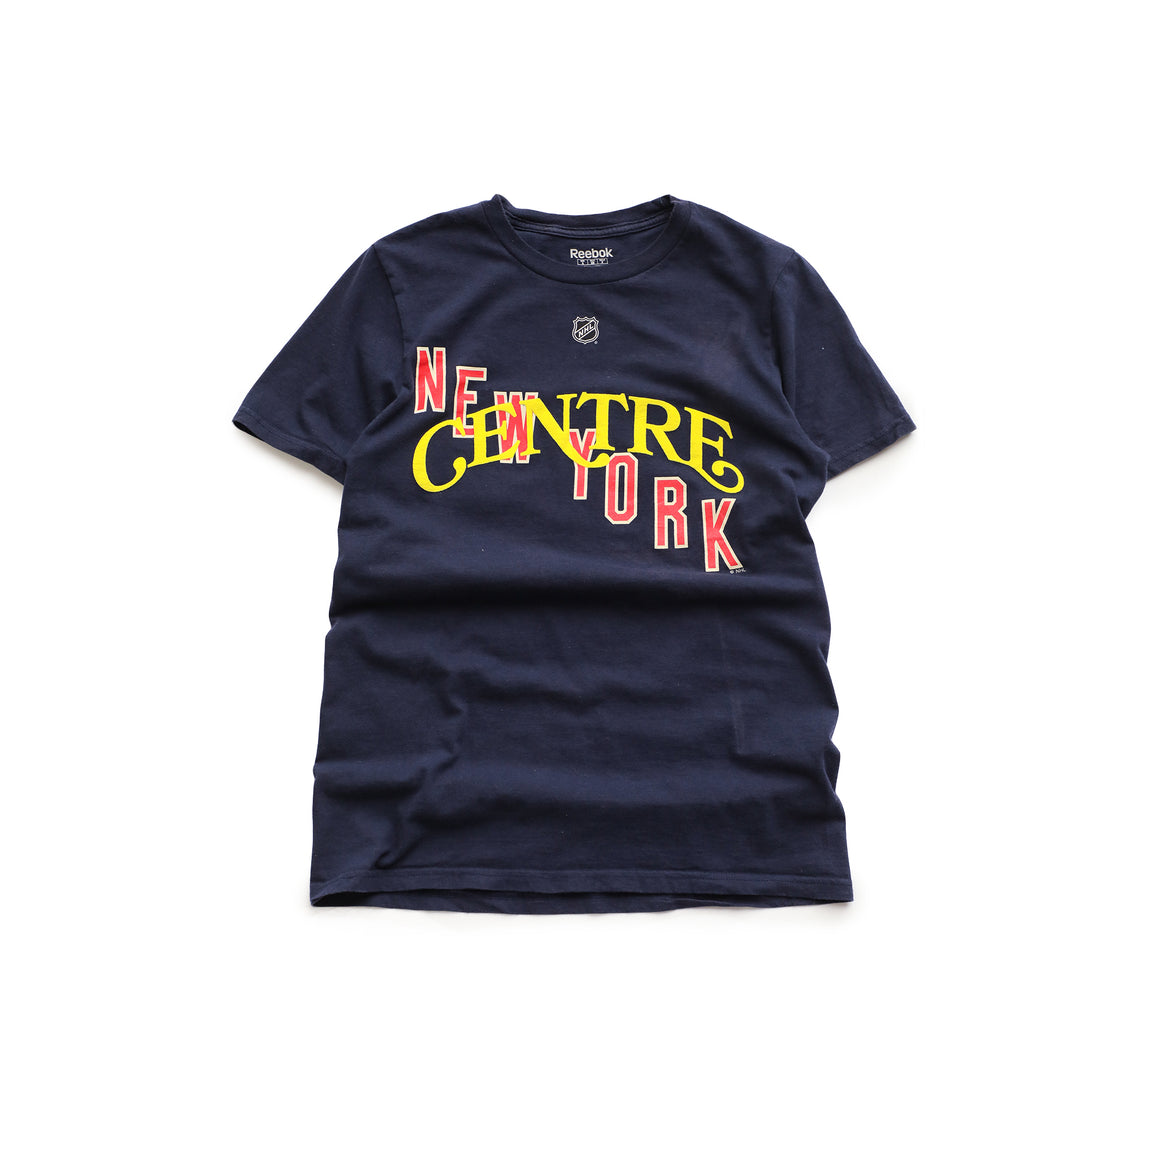 Centre Upcycled New York Lundqvist Tee - Centre Upcycled New York Lundqvist Tee - 